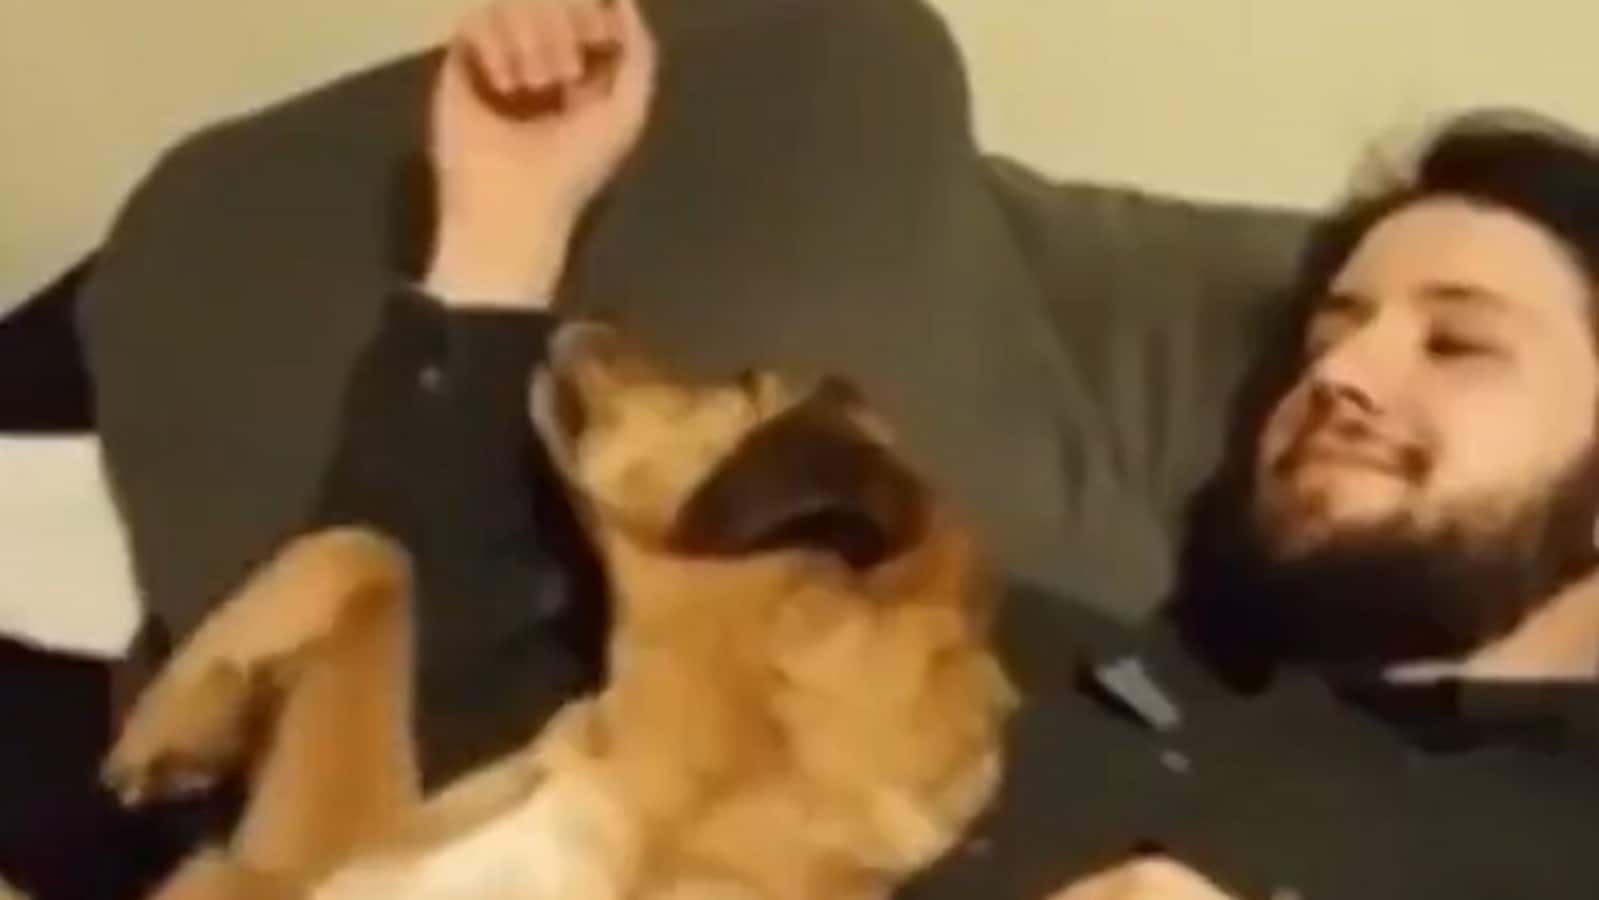 Dog asks for belly rubs in the most adorable way. Watch